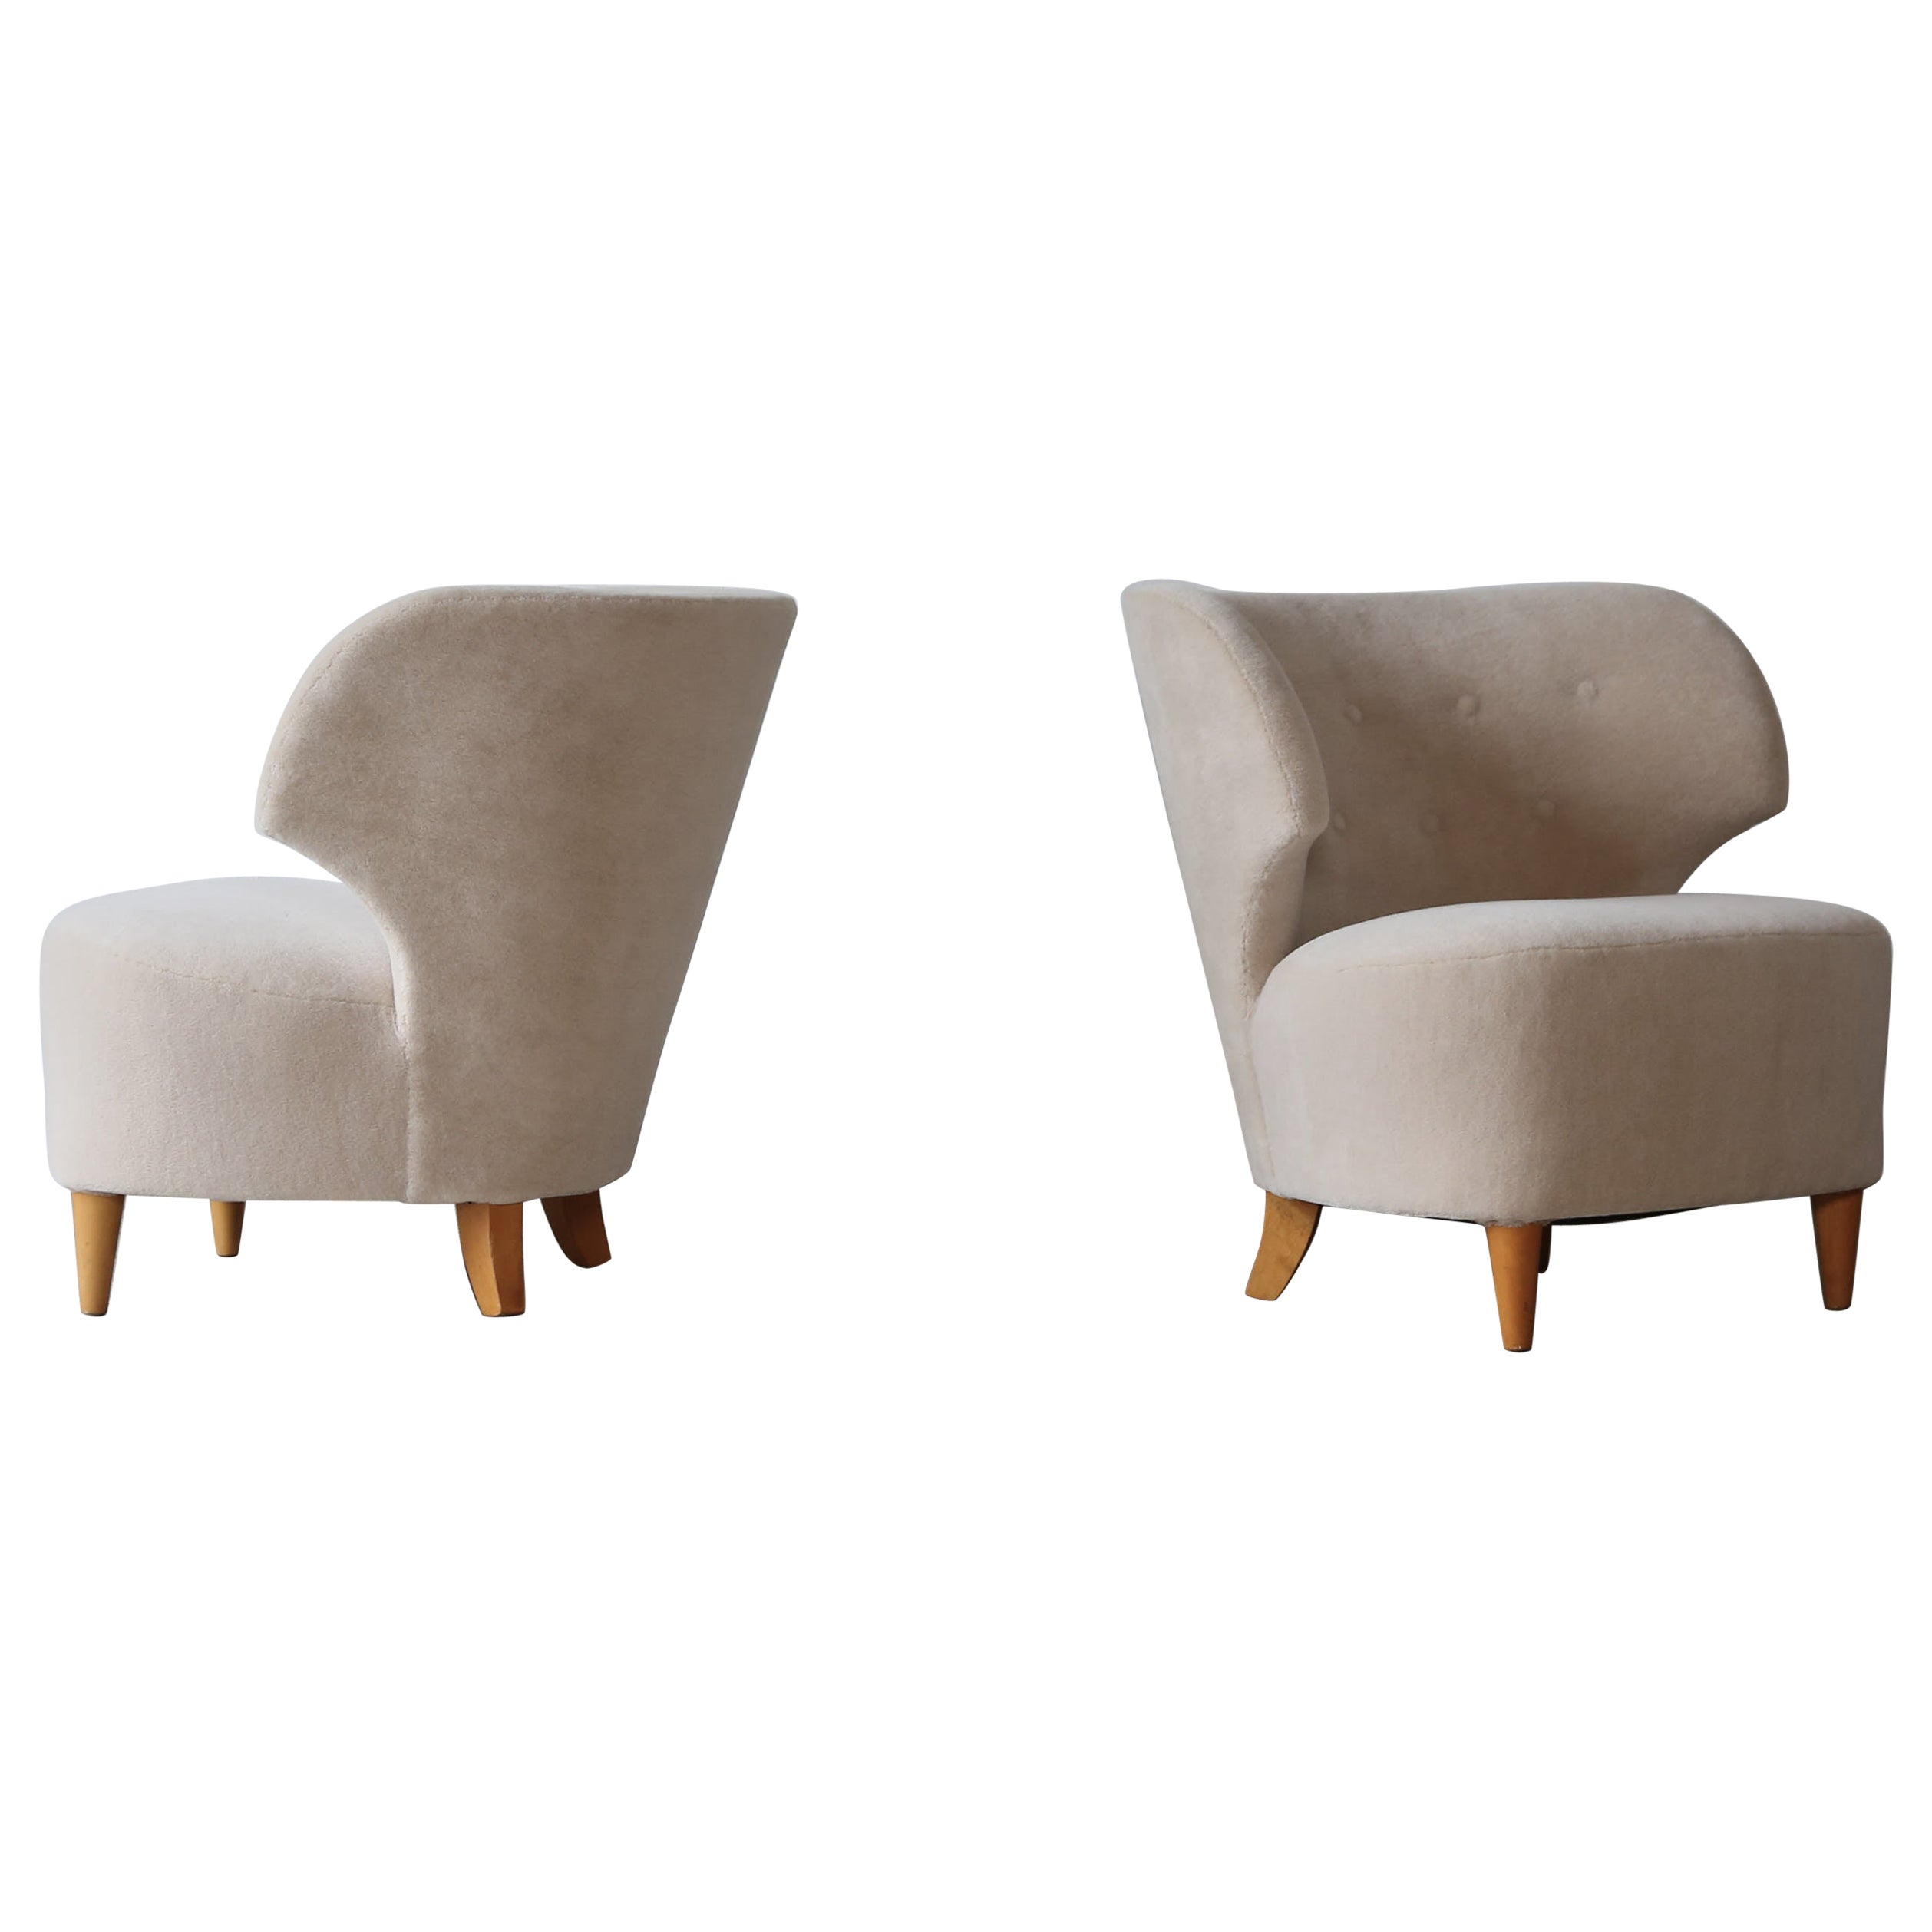 Pair of Carl-Johan Boman Chairs, Finland, 1940s, Newly Upholstered in Alpaca For Sale